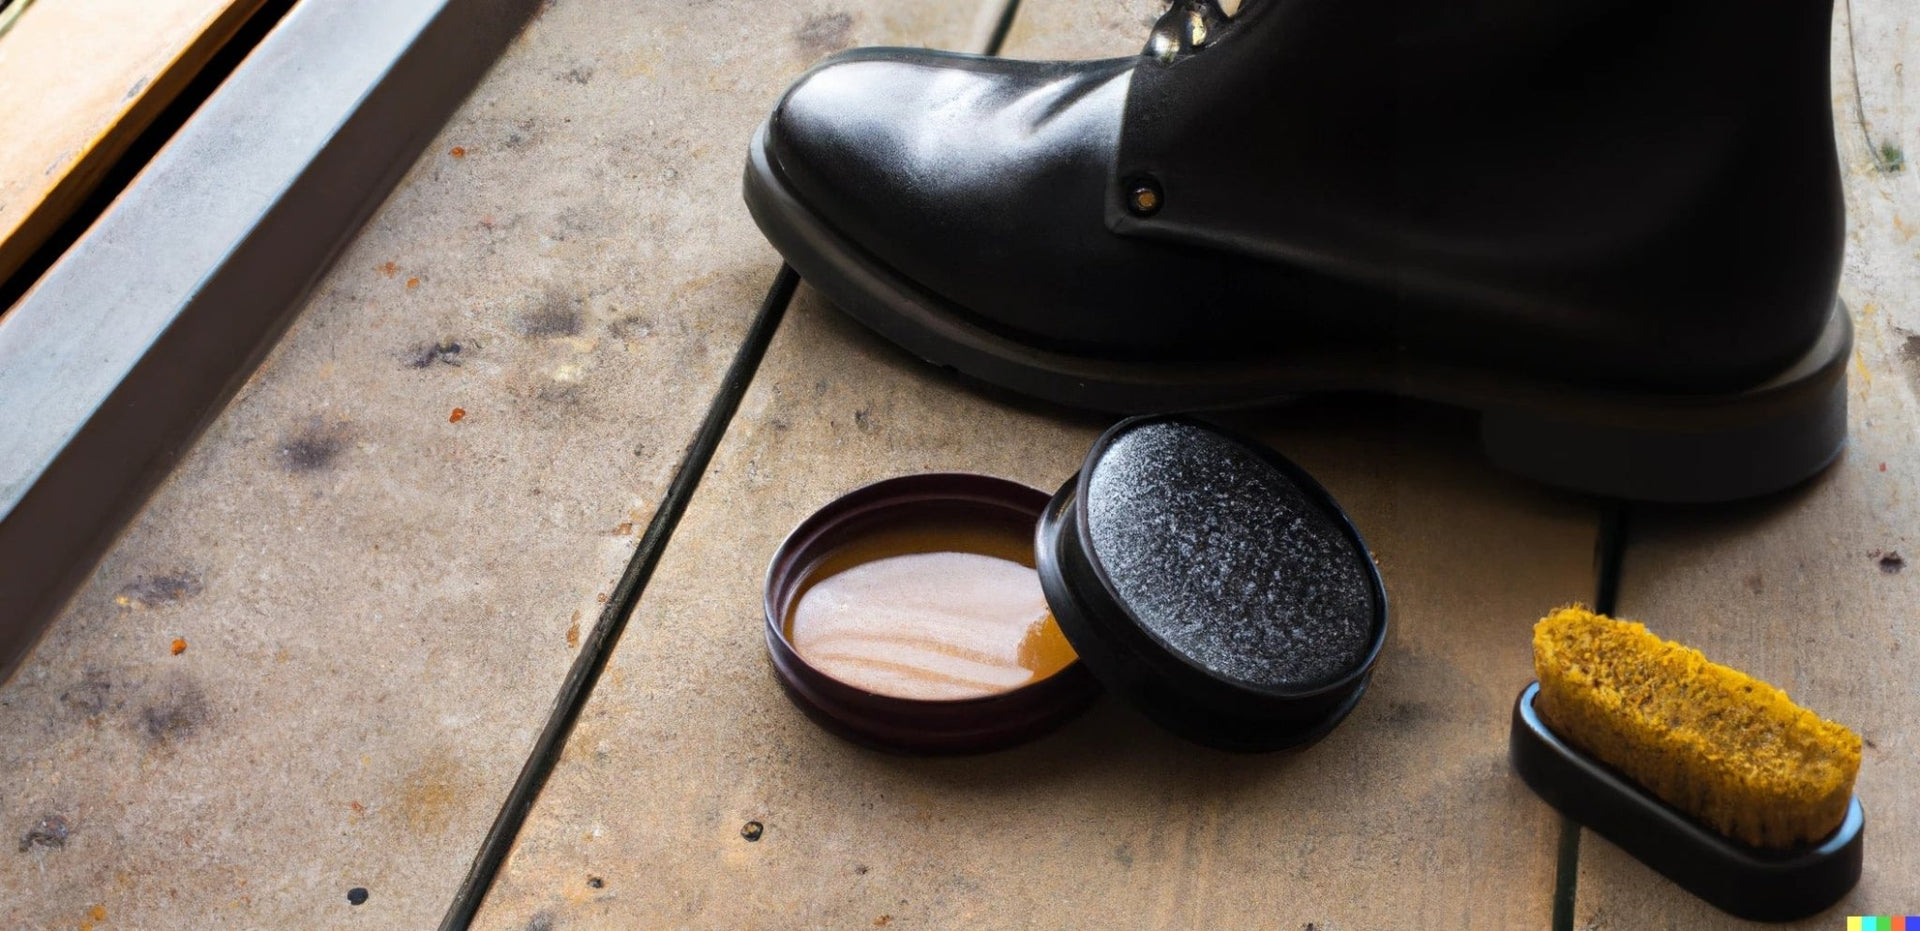 How To Make Beeswax Leather Conditioner & Shoe Polish